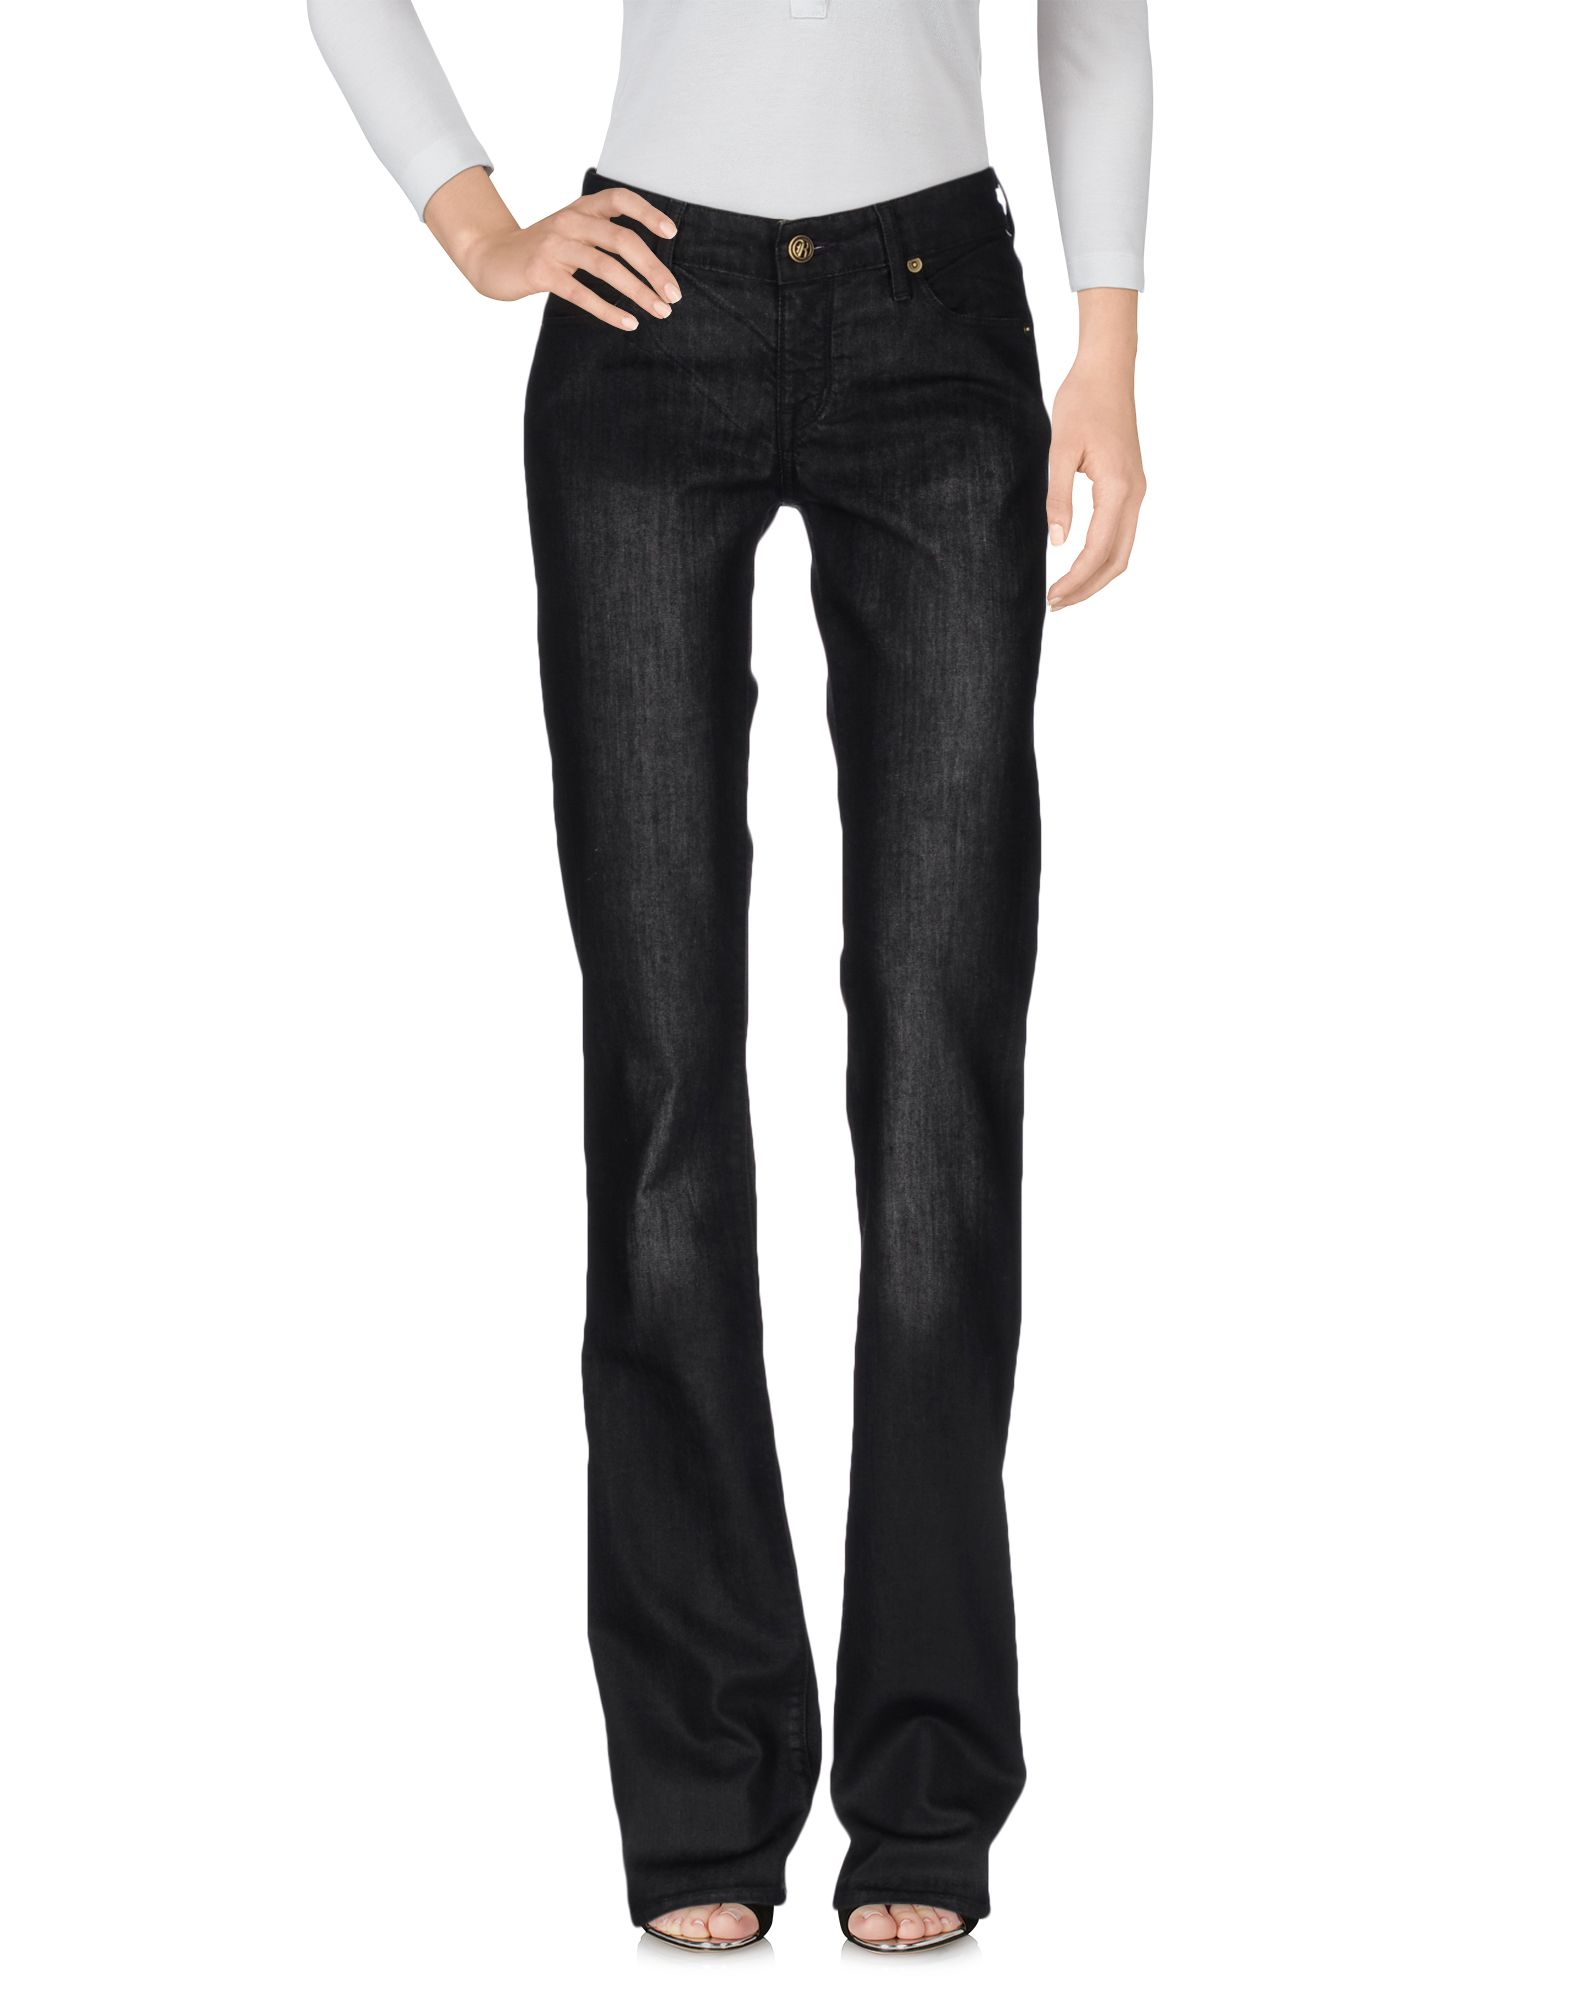 Rich and Skinny Women's Jeans | Jeans Hub